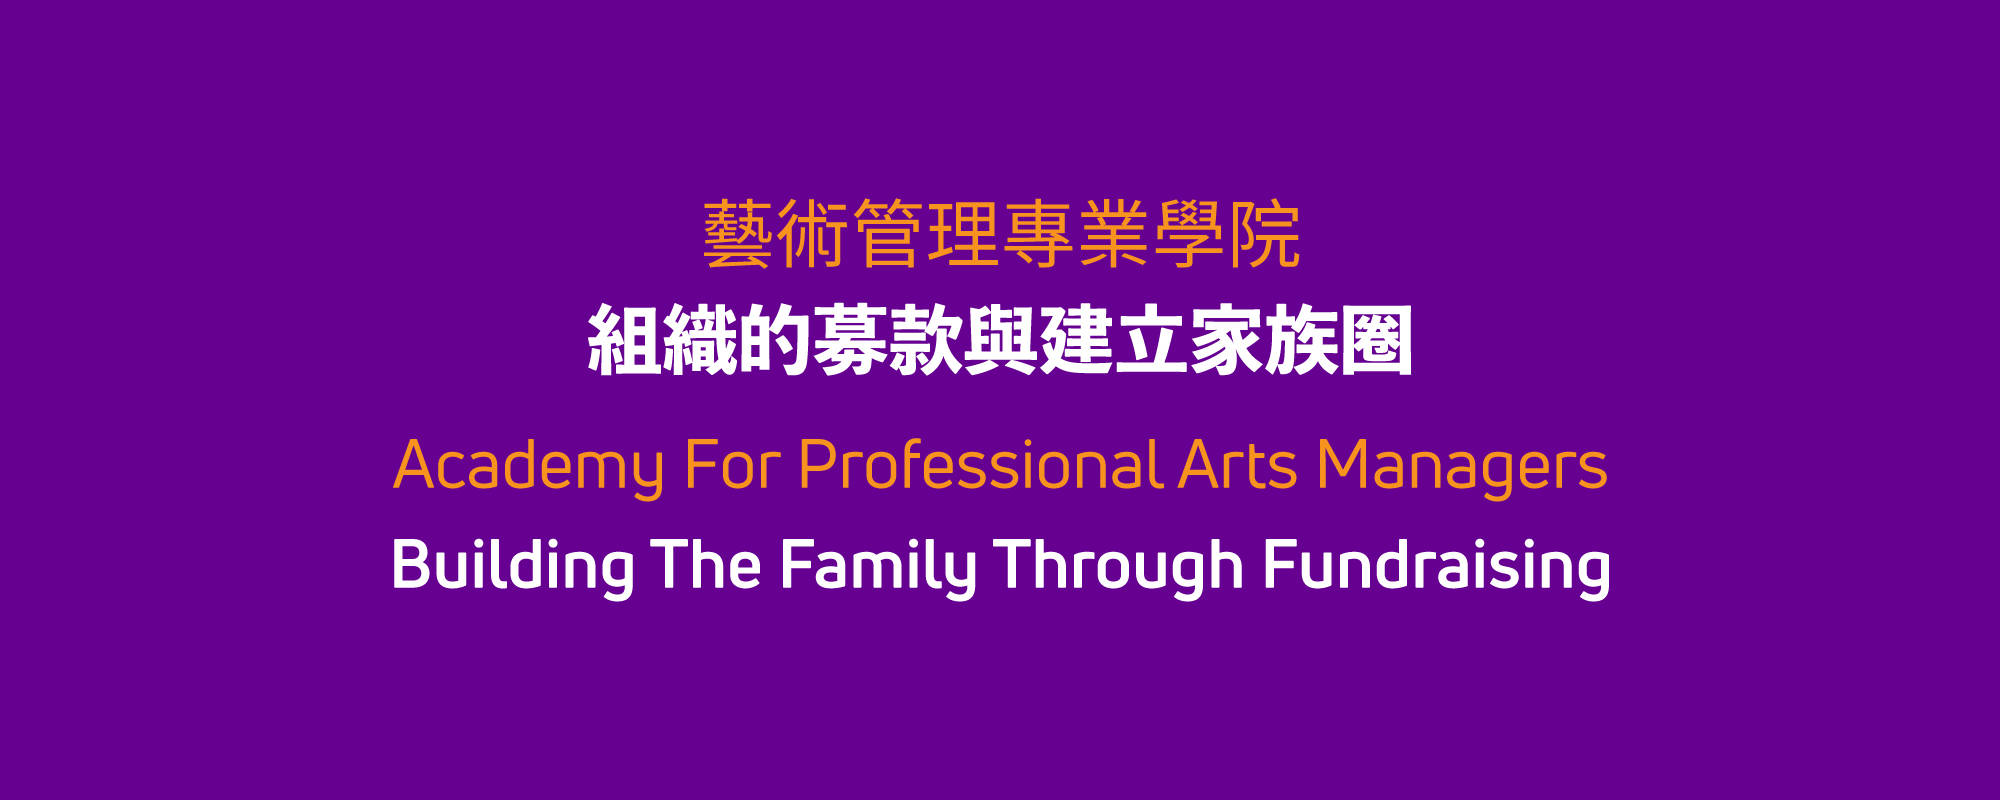 Academy for Professional Arts Managers- Building the Family through Fundraising